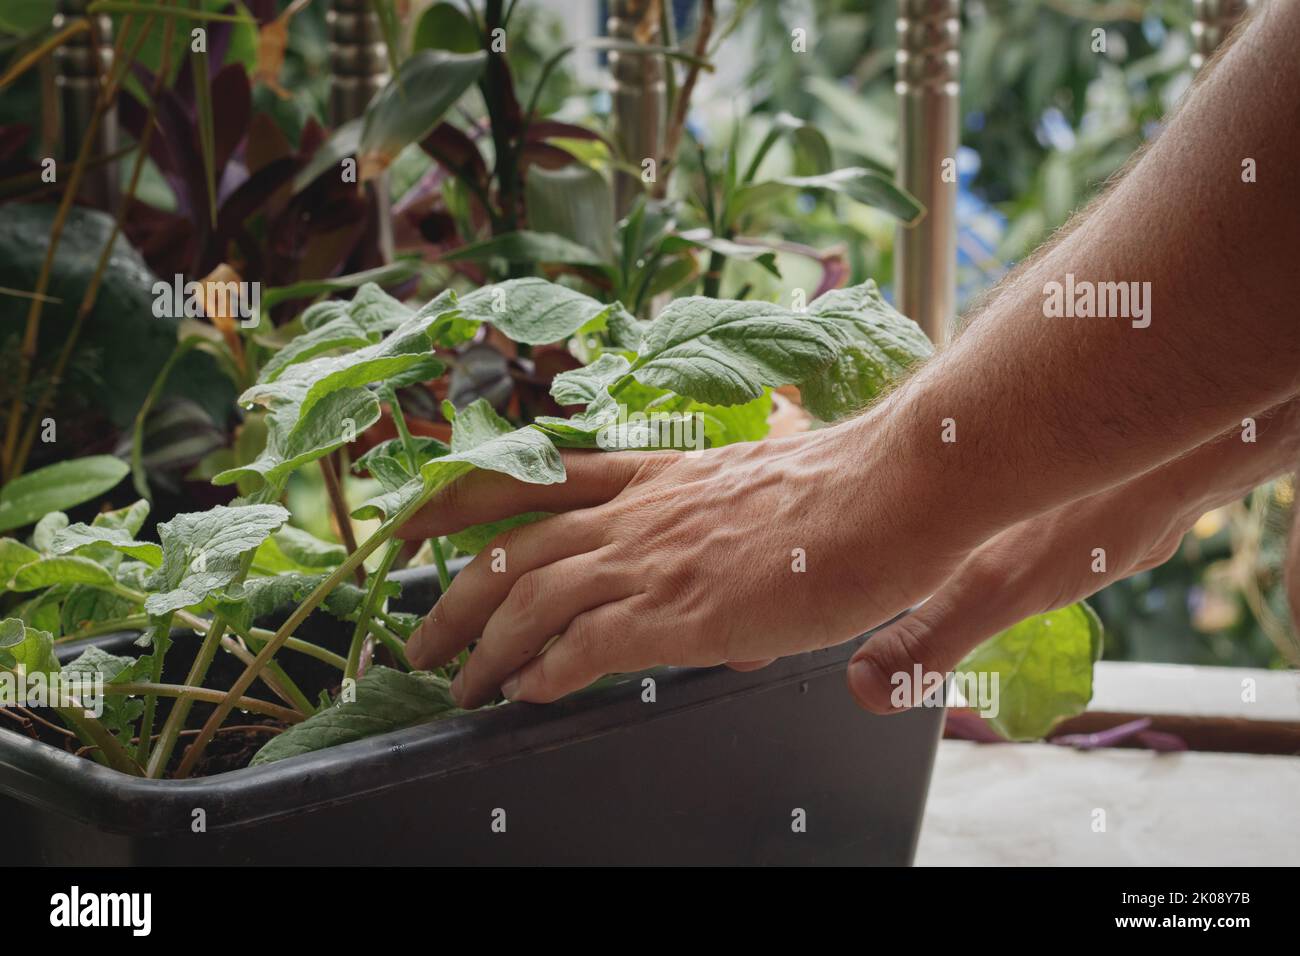 Hands harvesting organic homegrown red radish in an urban balcony garden showing eco-friendly and sustainable lifestyle Stock Photo